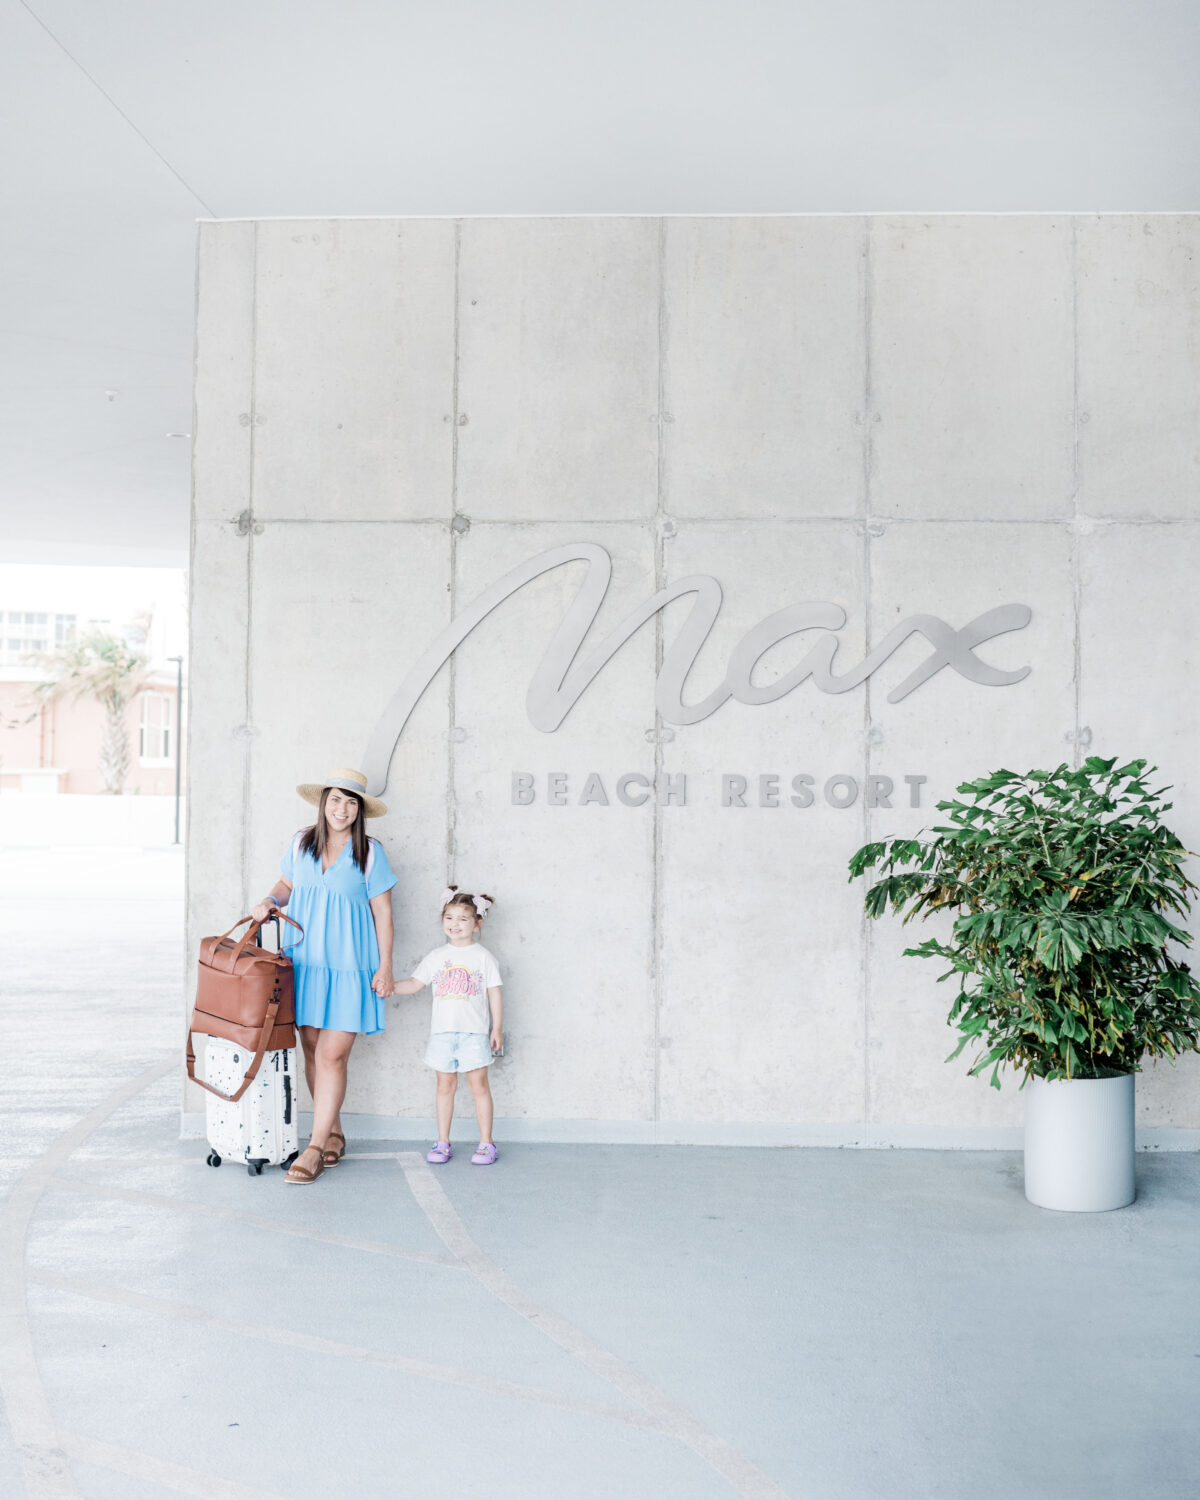 Brittney Naylor and daughter holding hands with luggage beside them standing in front of Max Beach Resort sign, a Daytona Beach Hotel